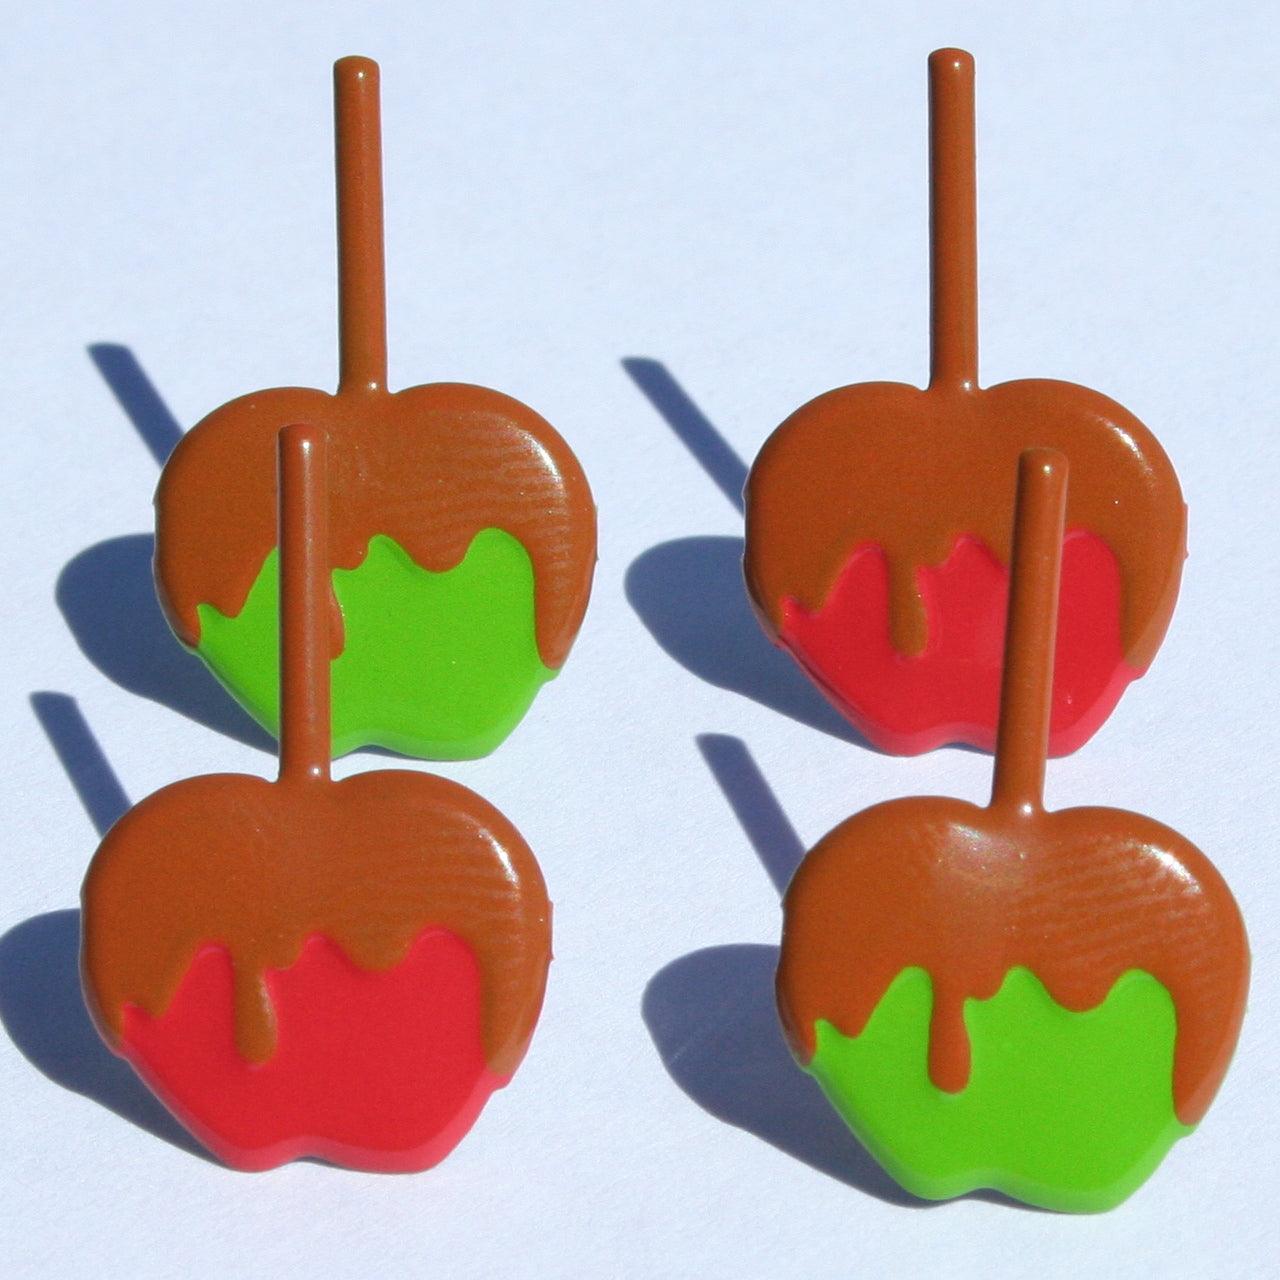 Candy Apple Brads by Eyelet Outlet - Pkg. of 12